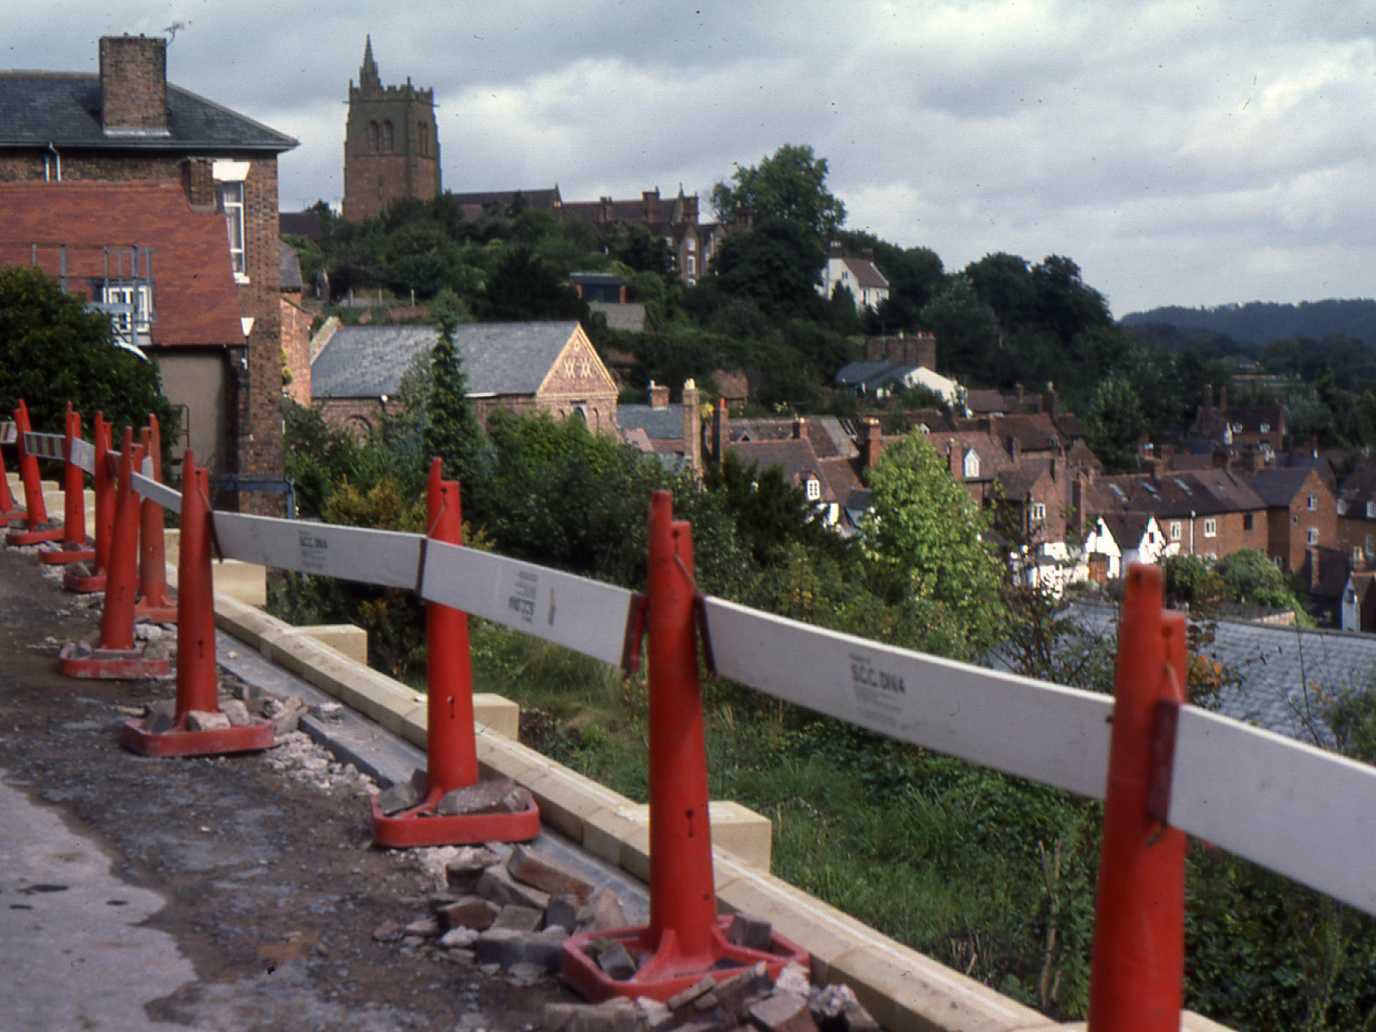 The time a Shropshire town rallied round to replace the railings along its historic walk